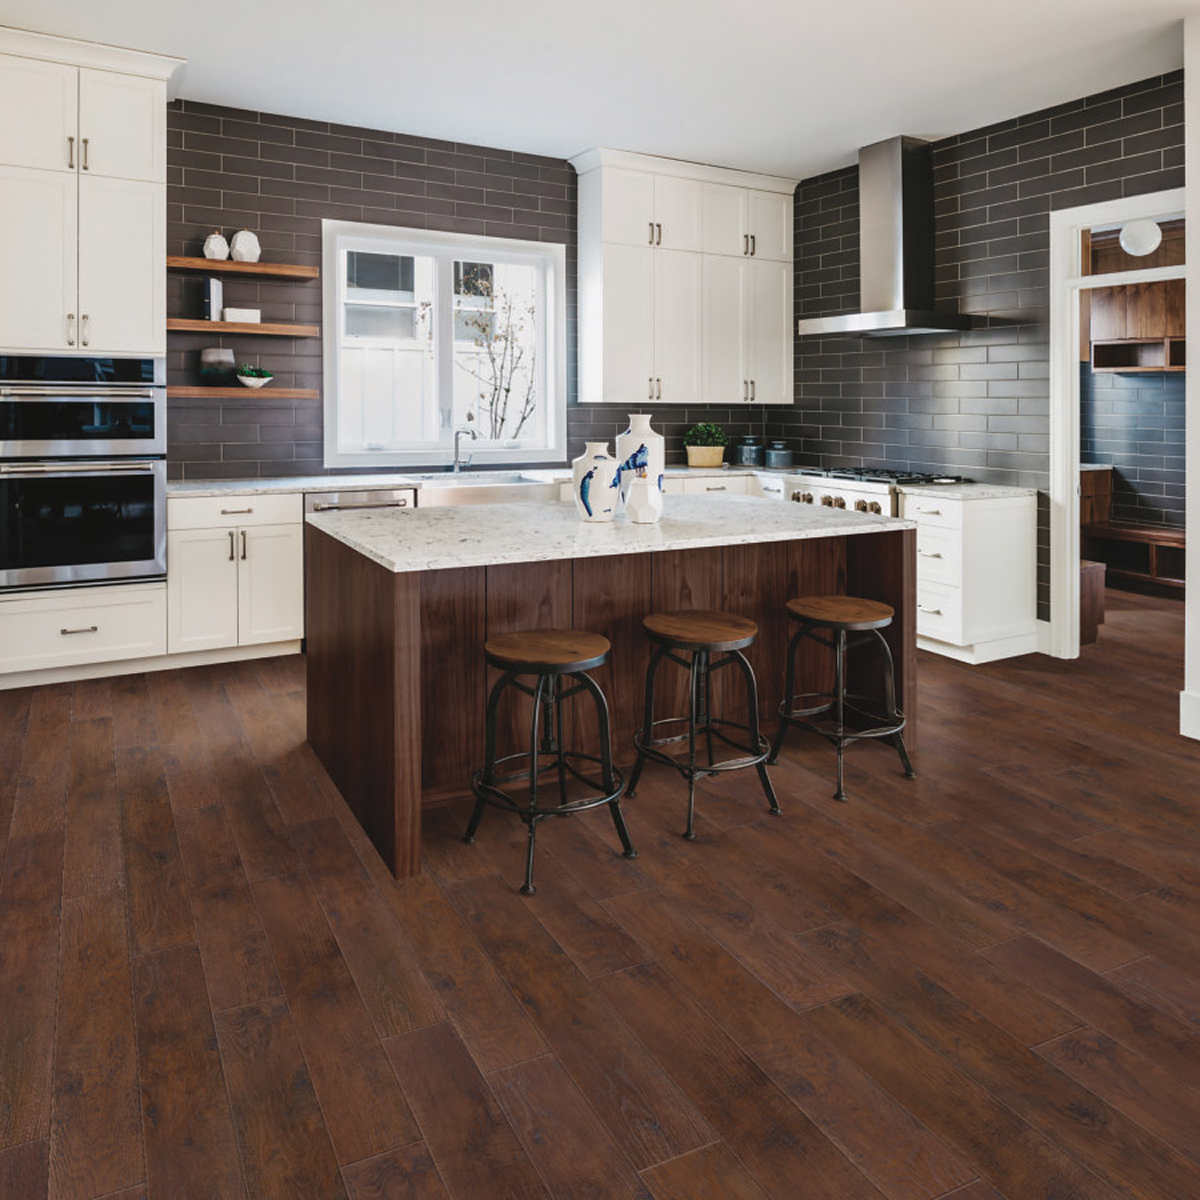 Mohawk Home Rustic Spiced Oak 10mm Thick Laminate Flooring